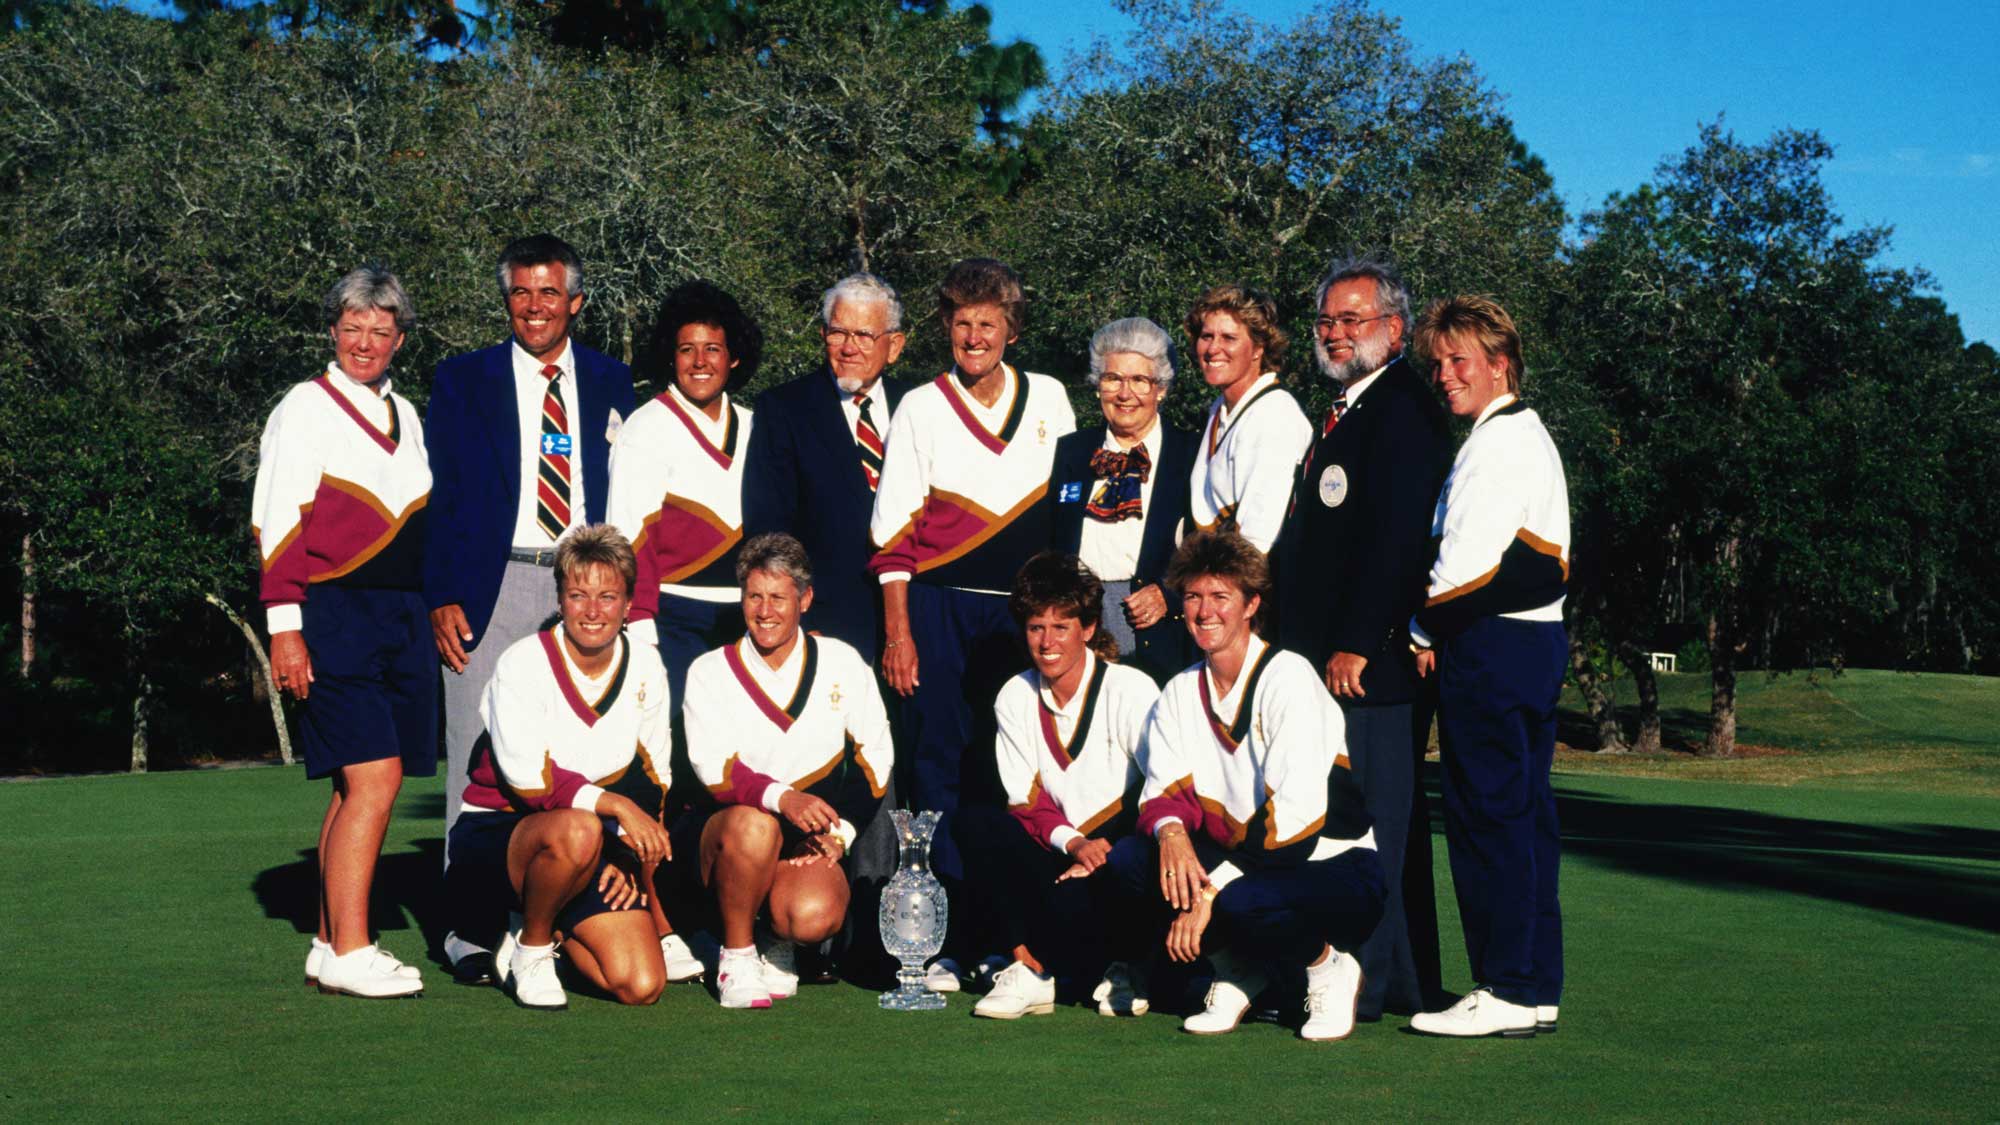 The victorious USA team with the Solheim family after the Solheim Cup in 1990